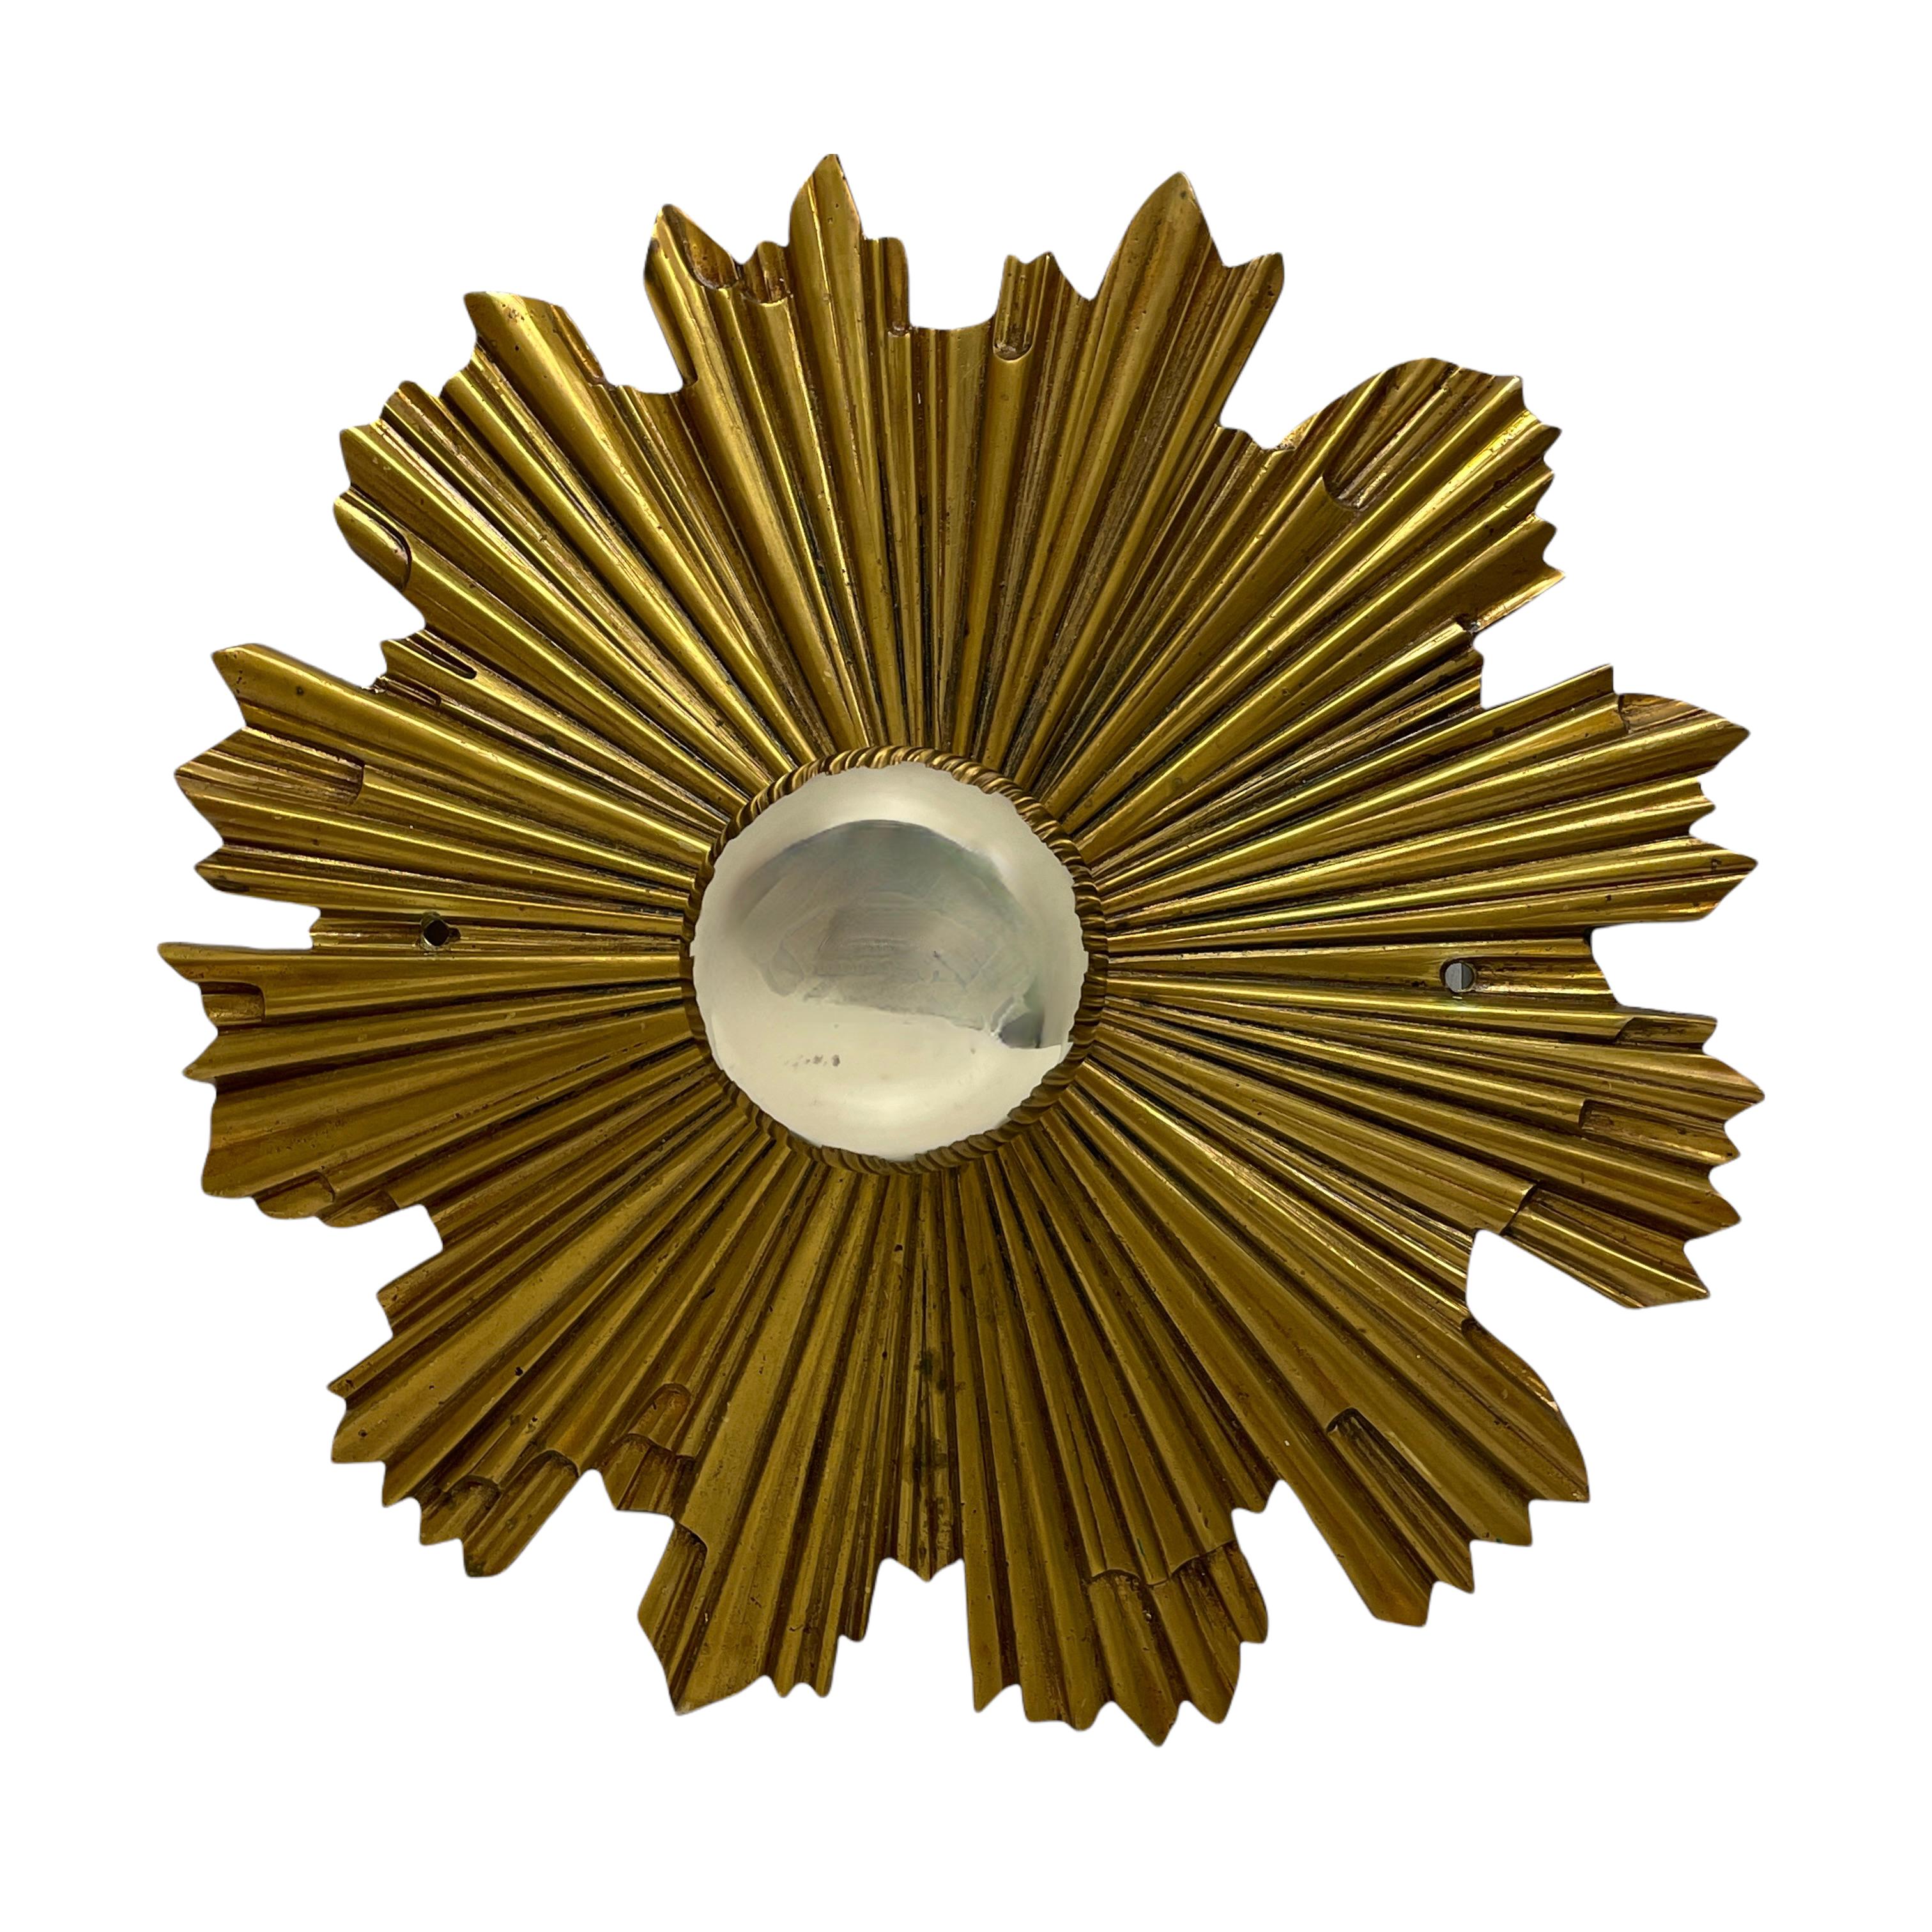 Beautiful brutalist florentine style flush mount. Made in Italy. Gorgeous sunburst starburst flush mount with a single light. The Fixture requires a European E27 / 110 Volt Edison bulb, up to 100 watts. You can also use it as wall light. This light